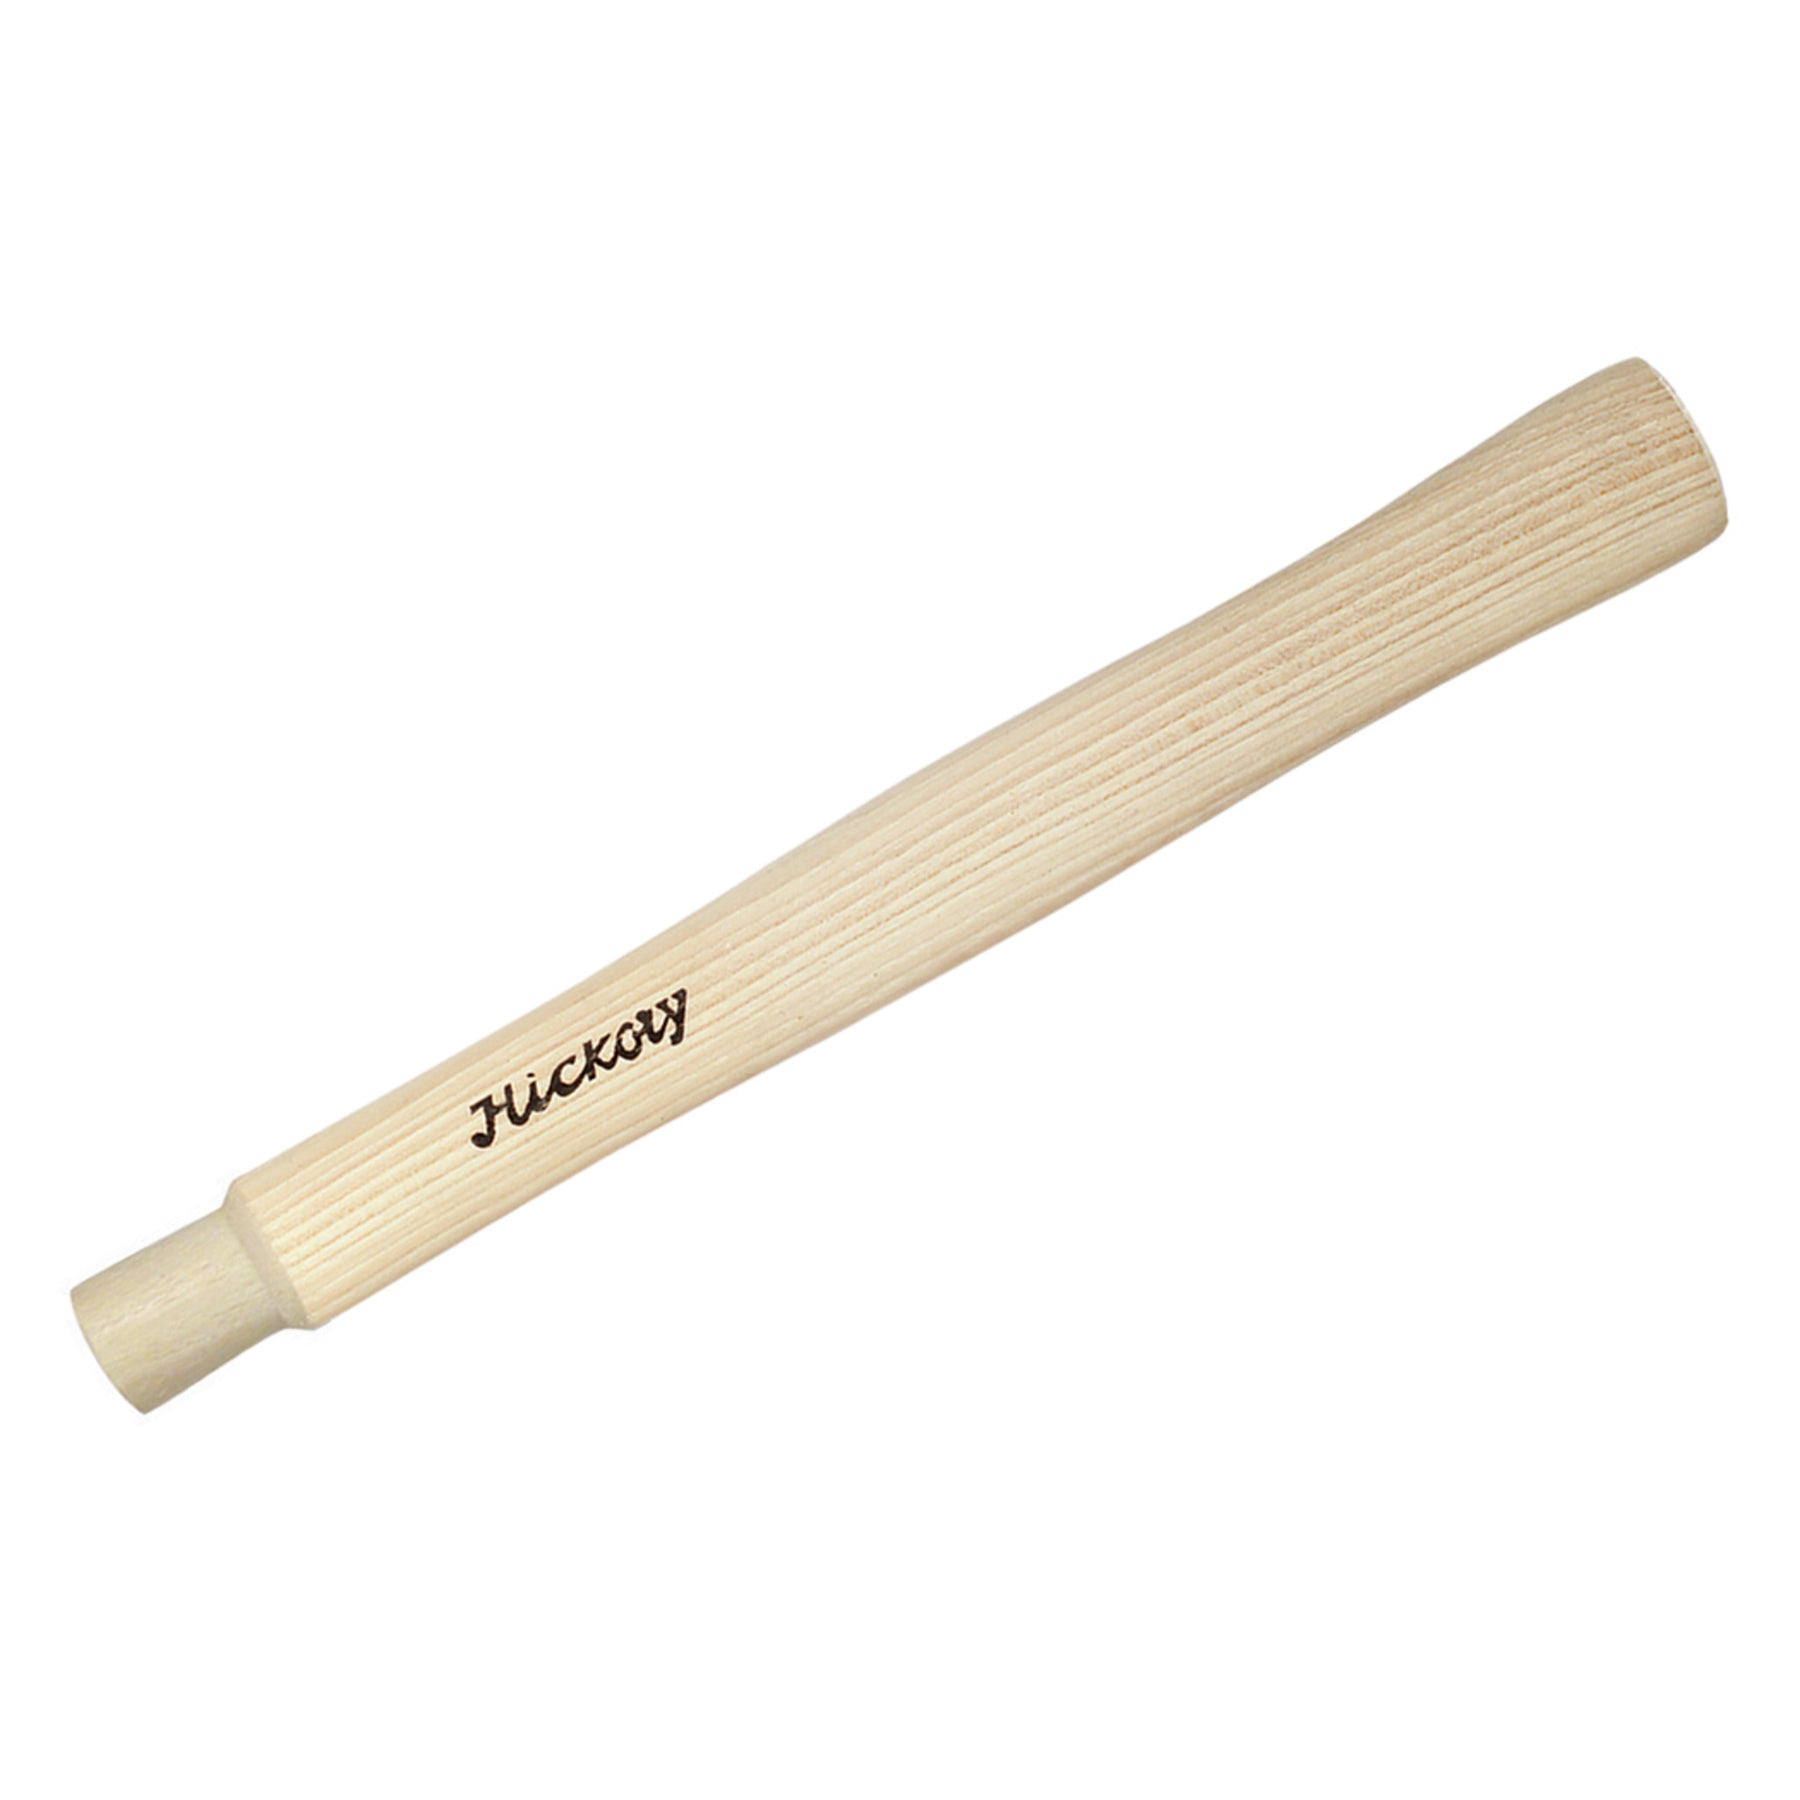 Wiha 80081 Hammer Hickory Handle Replacement 100mm